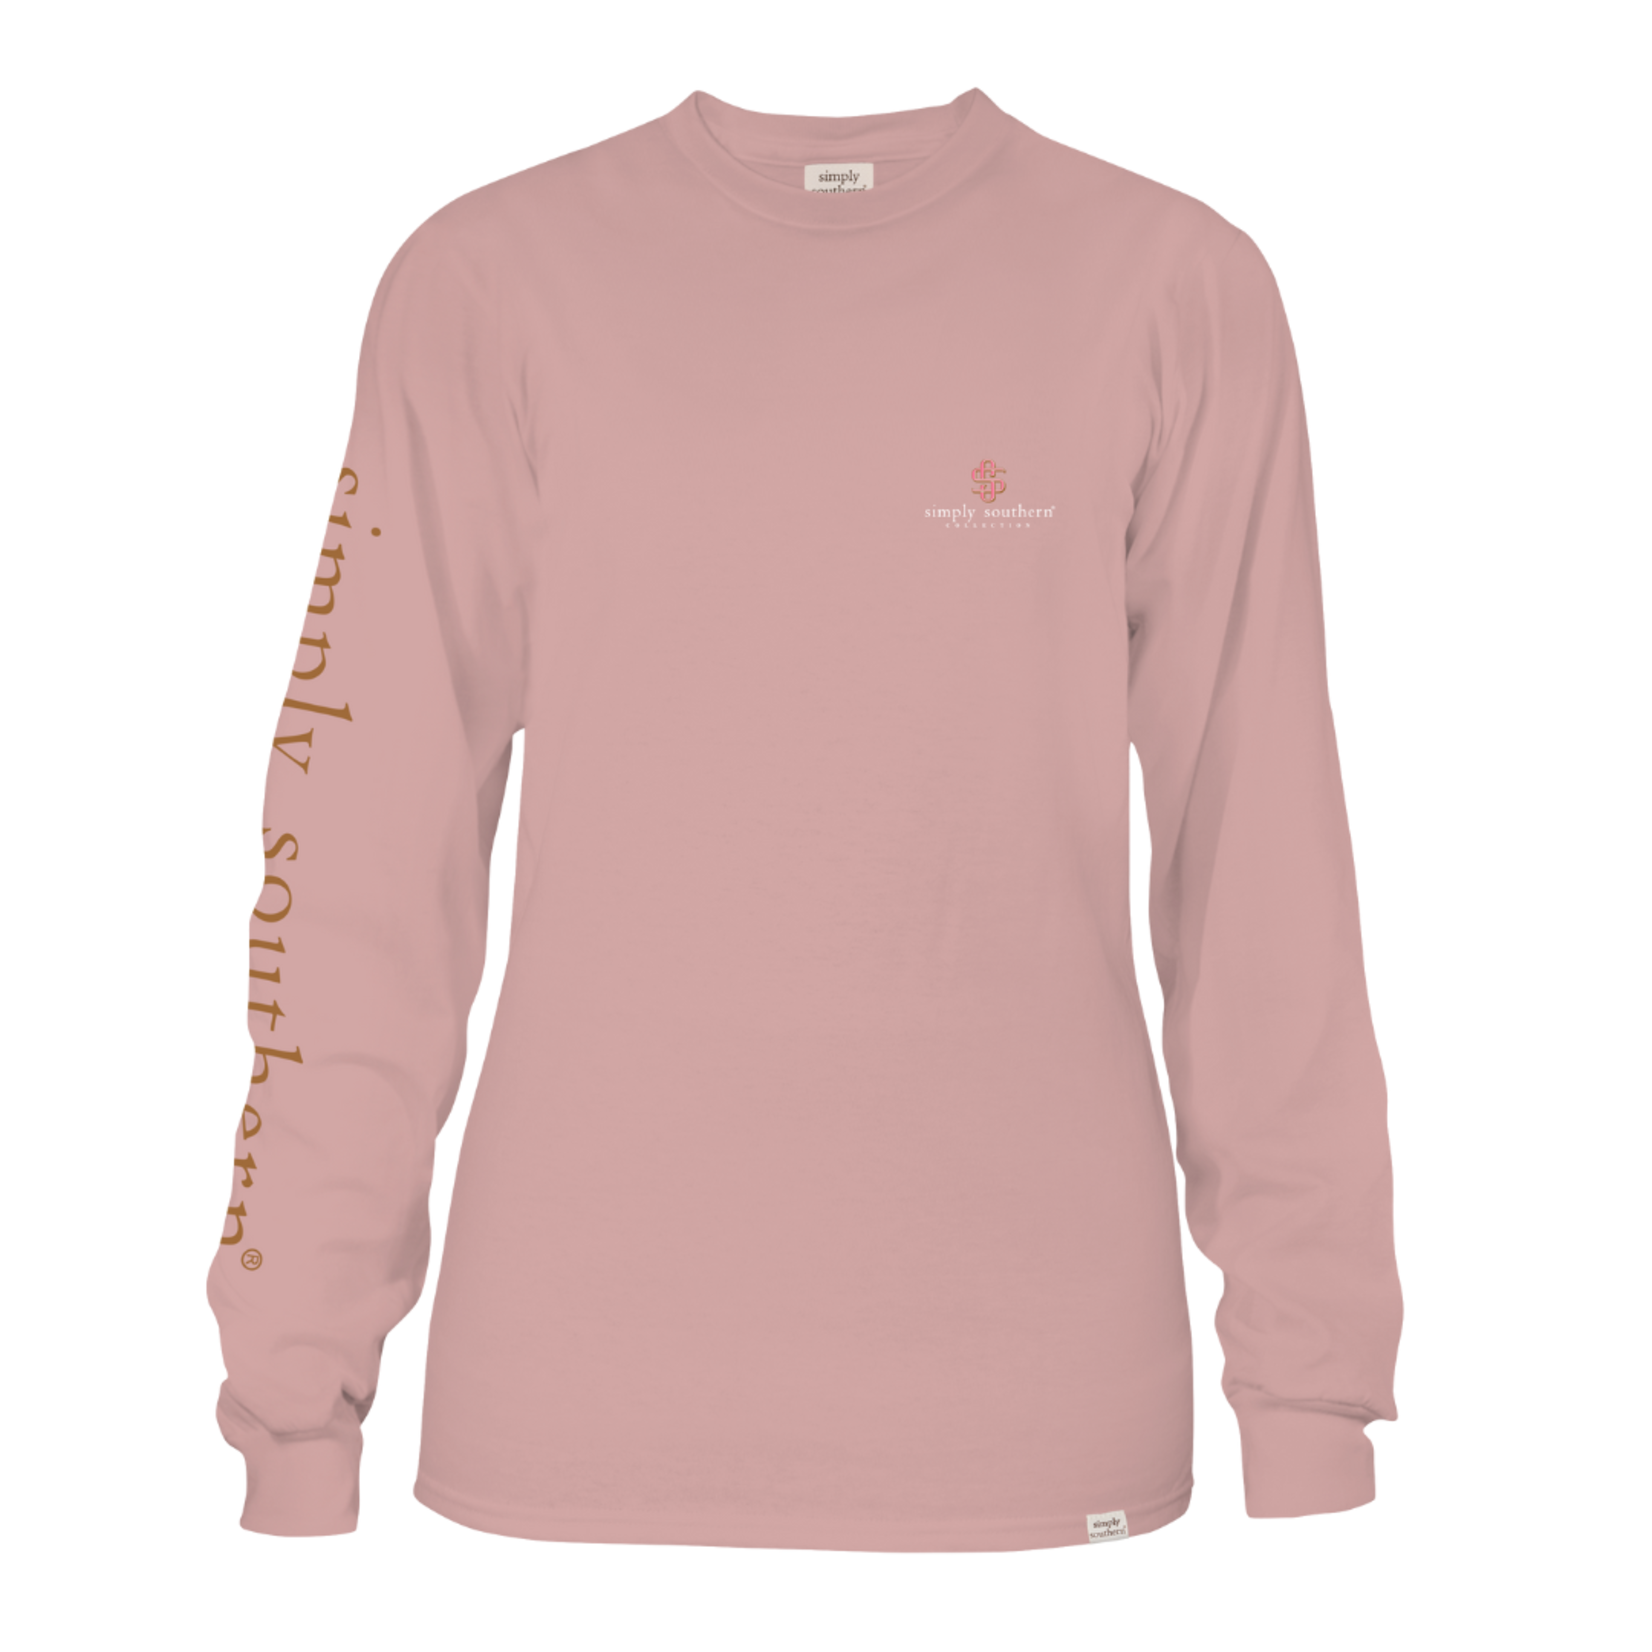 Simply Southern YOUTH LS FANCY Suede